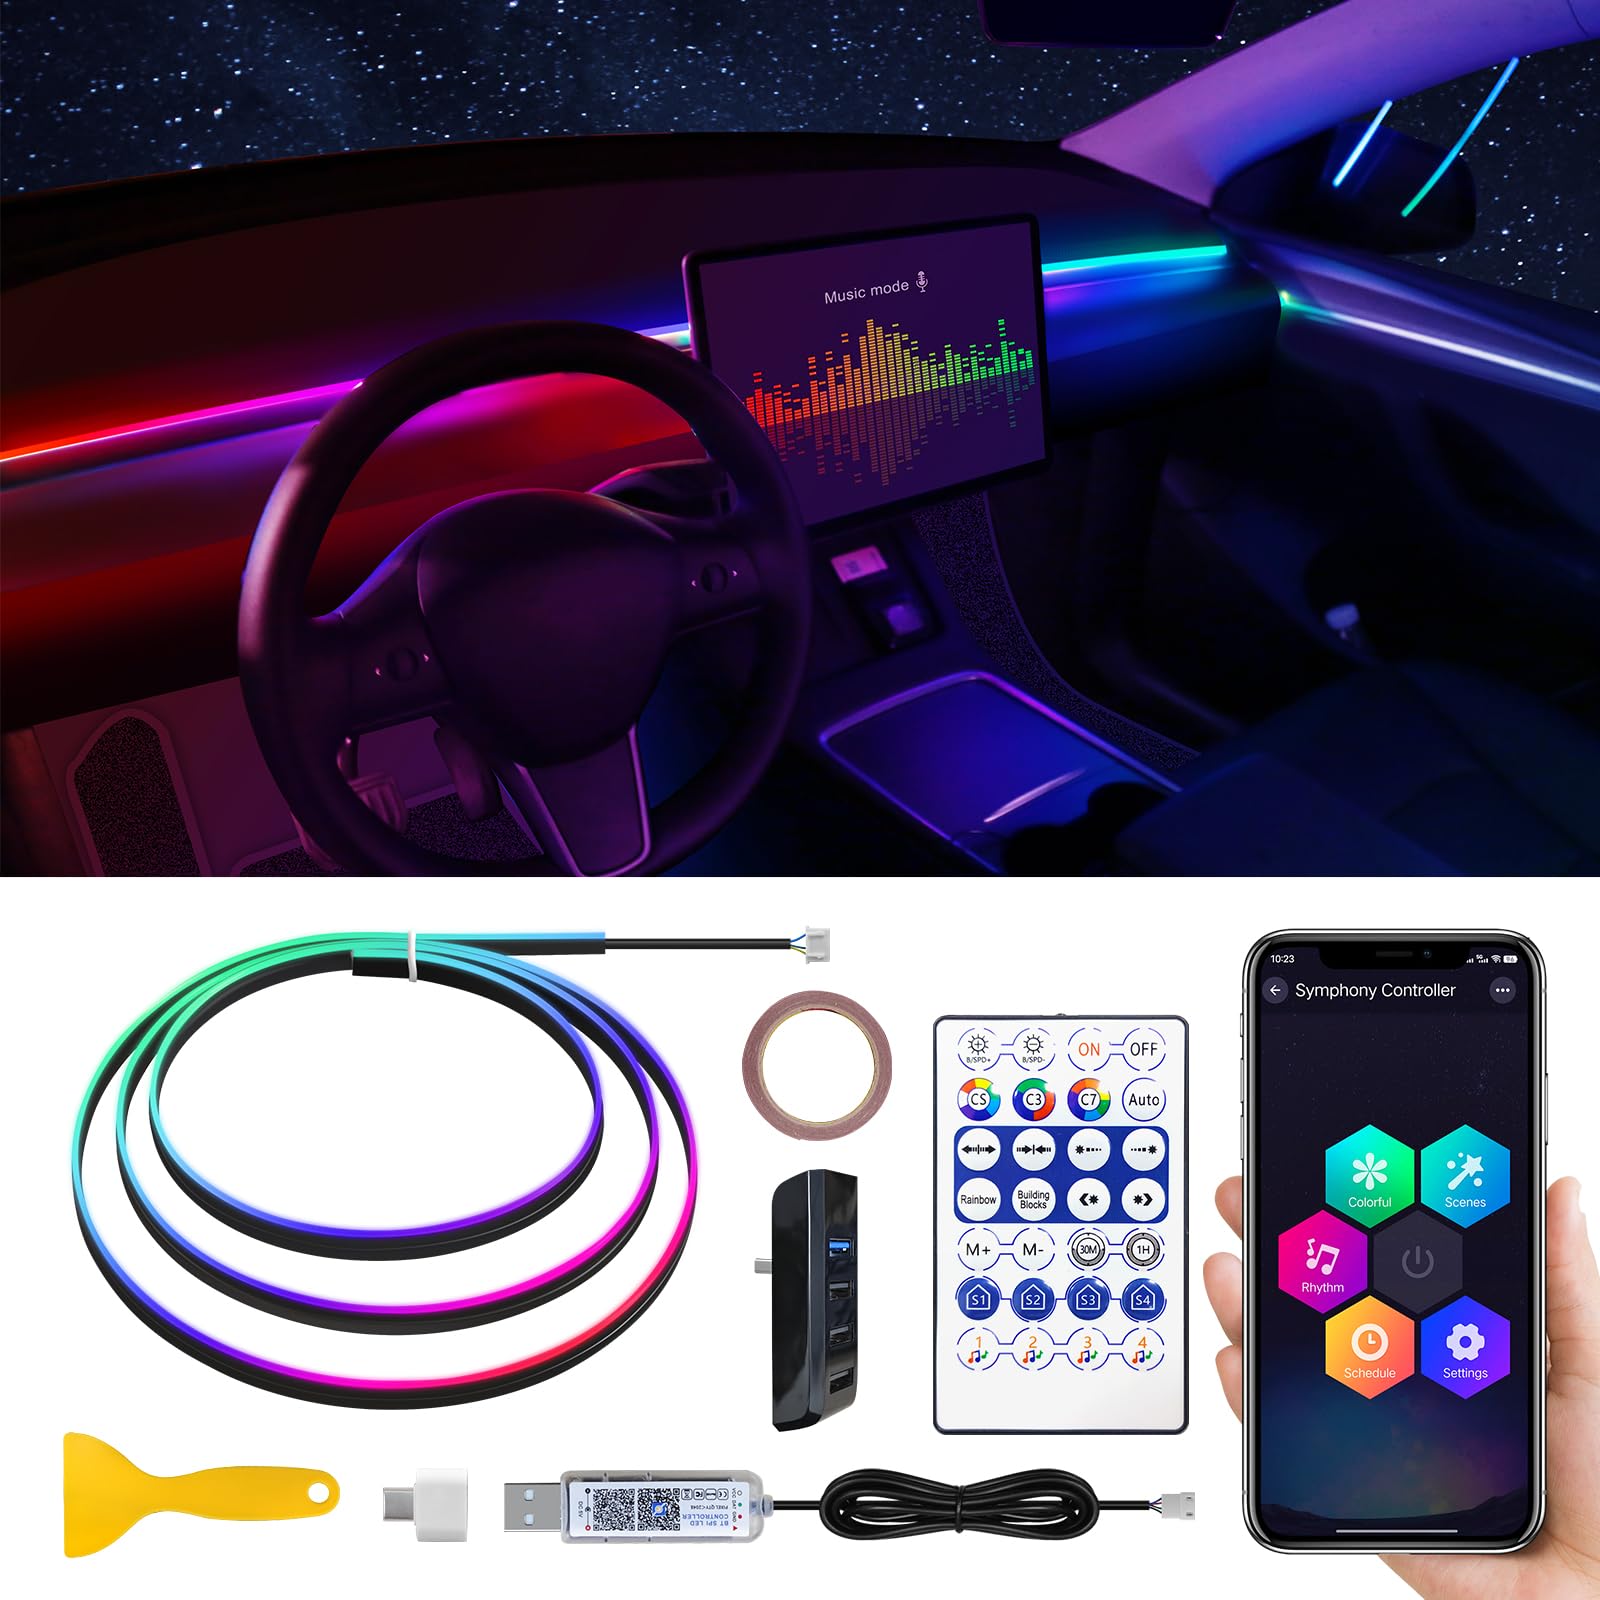 Tesla Model 3/Y Dreamcolor Acrylic Interior Car LED Strip Light with USB Hub, 55.1 inches Fiber Optic Tesla Ambient Lighting Kits, RGB+IC Colors Sound Active Function Neon LED Strip for 2021 2022 2023 von TWETIZ